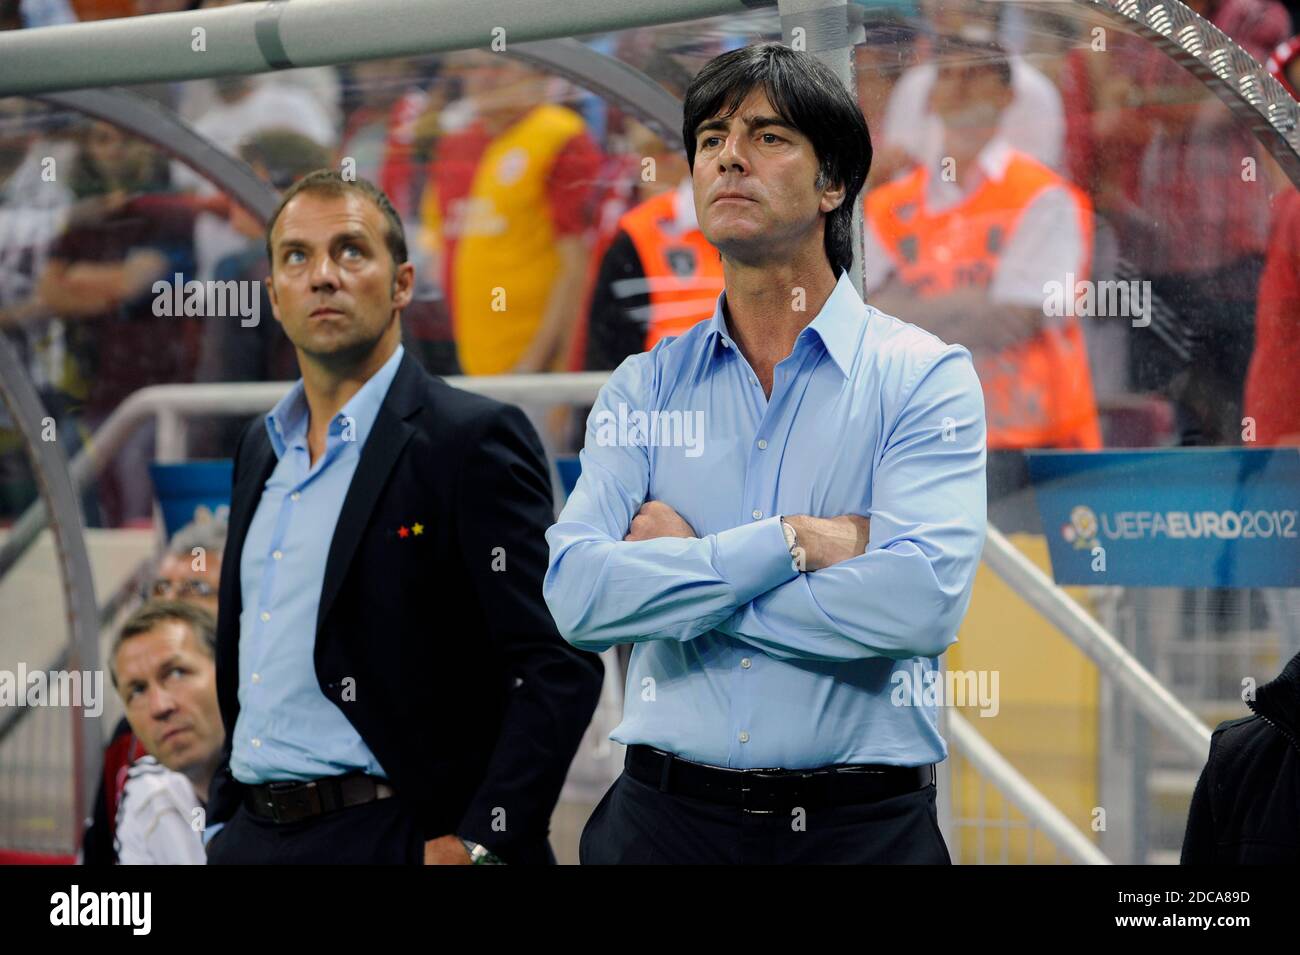 Report: Flick acted as Loew's successor after 0-6 defeat versus Spain. Archive photo: from left: Hans Dieter FLICK, Co coach (GER), federal coach Joachim Jogi LOEW, LÃ - W (GER), gesture, Soccer Laenderspiel EM qualification game for UEFA Euro 2012 in Poland/Ukraine, Tuerkei - Germany on 07.10.2011 . Â | usage worldwide Stock Photo